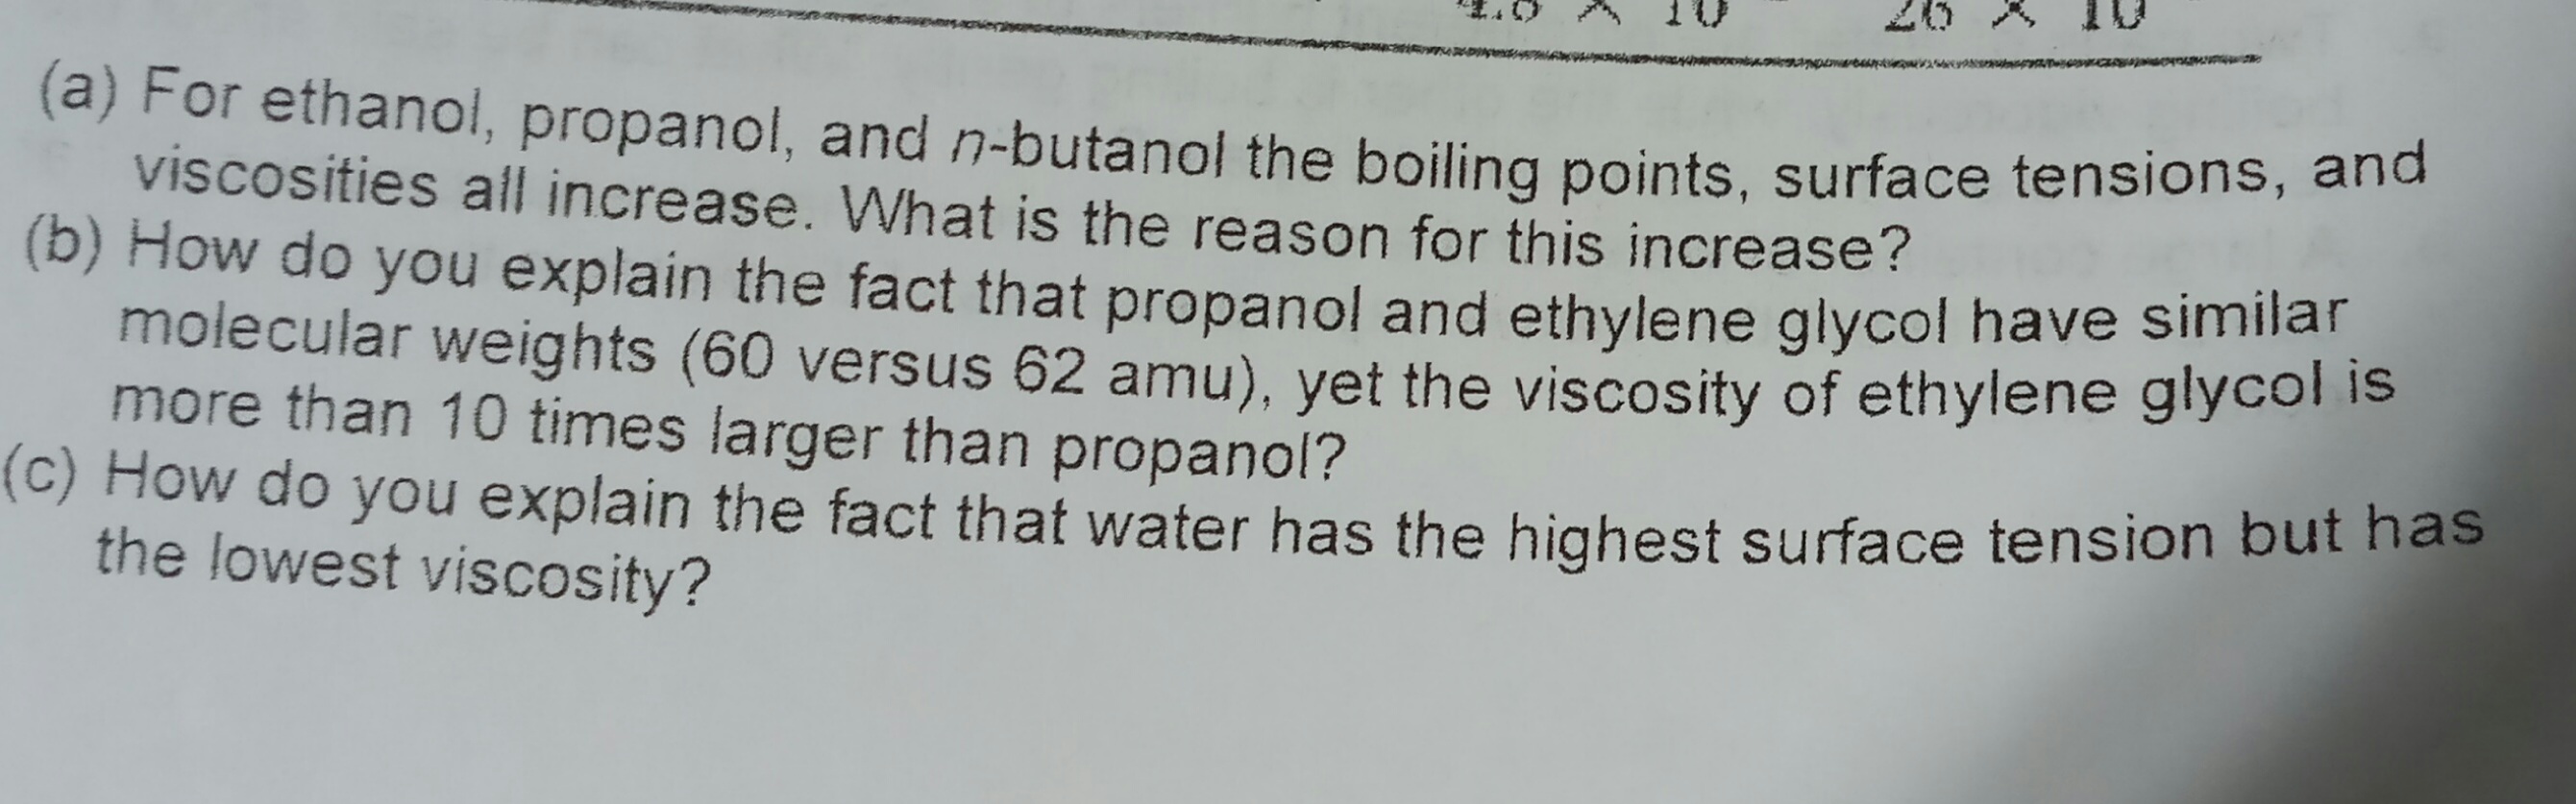 Food Viscosity Testing Above the Boiling Point